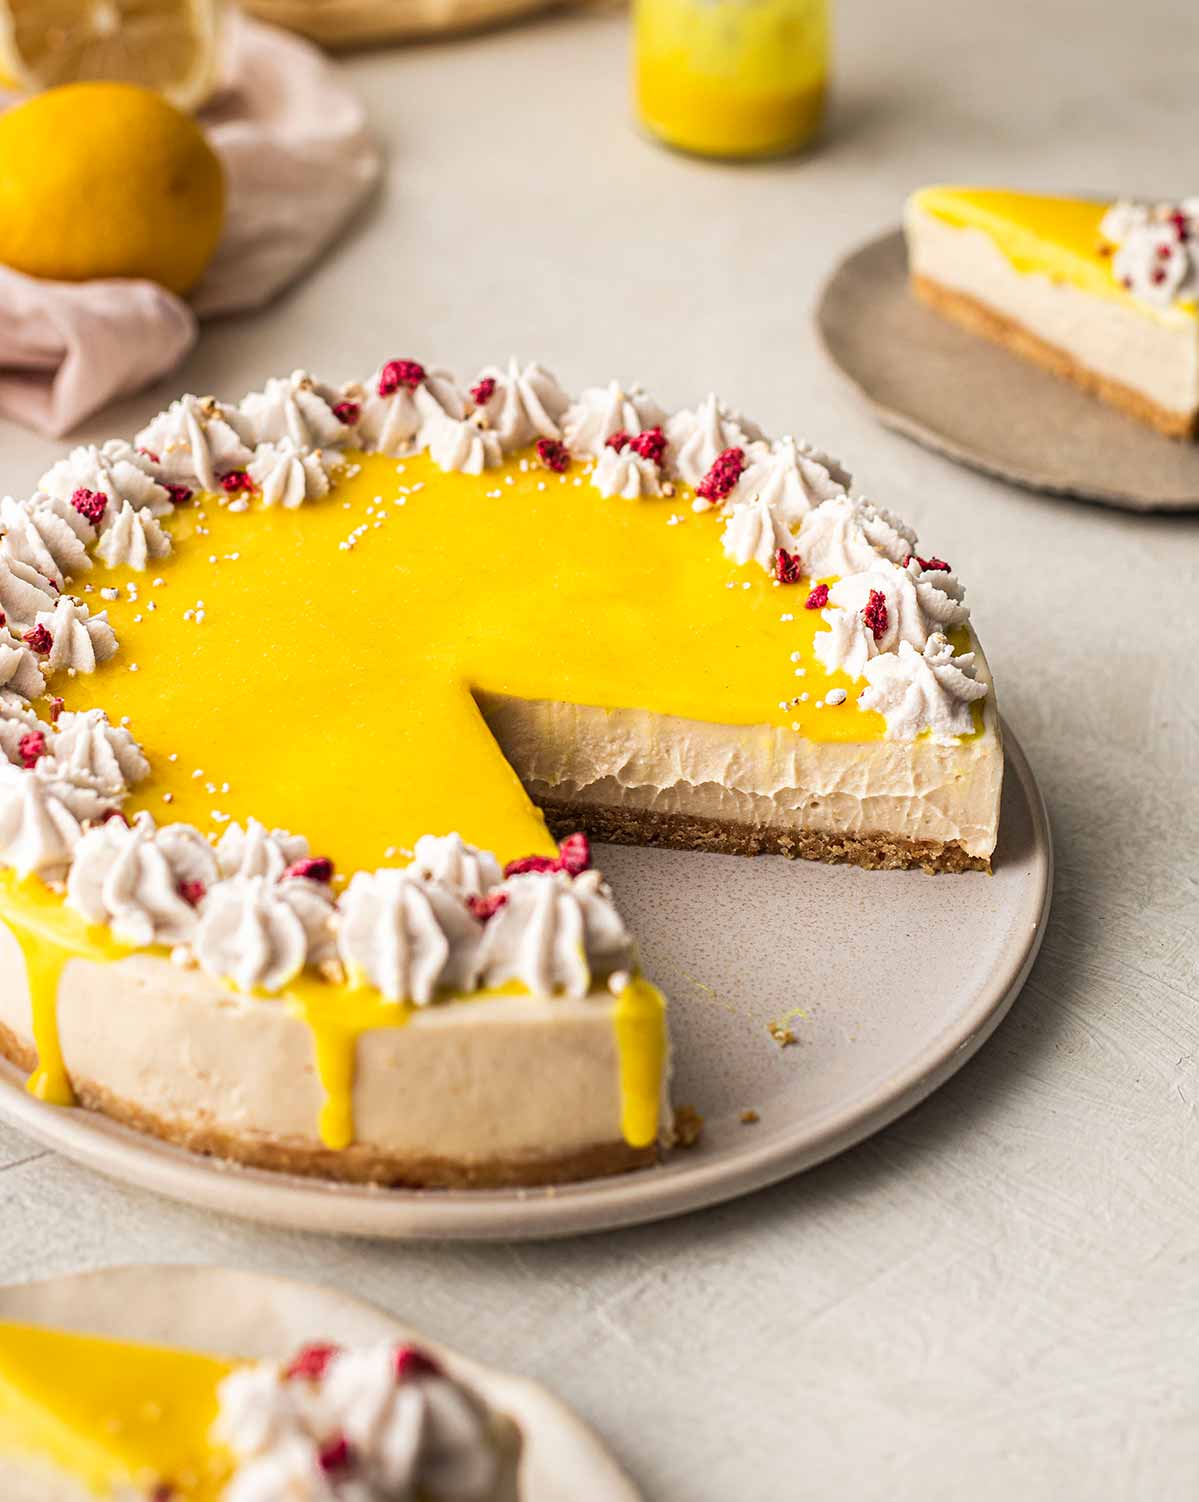 Vegan cheesecake topped with eggless lemon curd on a plate. Slice cut out of cheesecake revealing creamy texture.